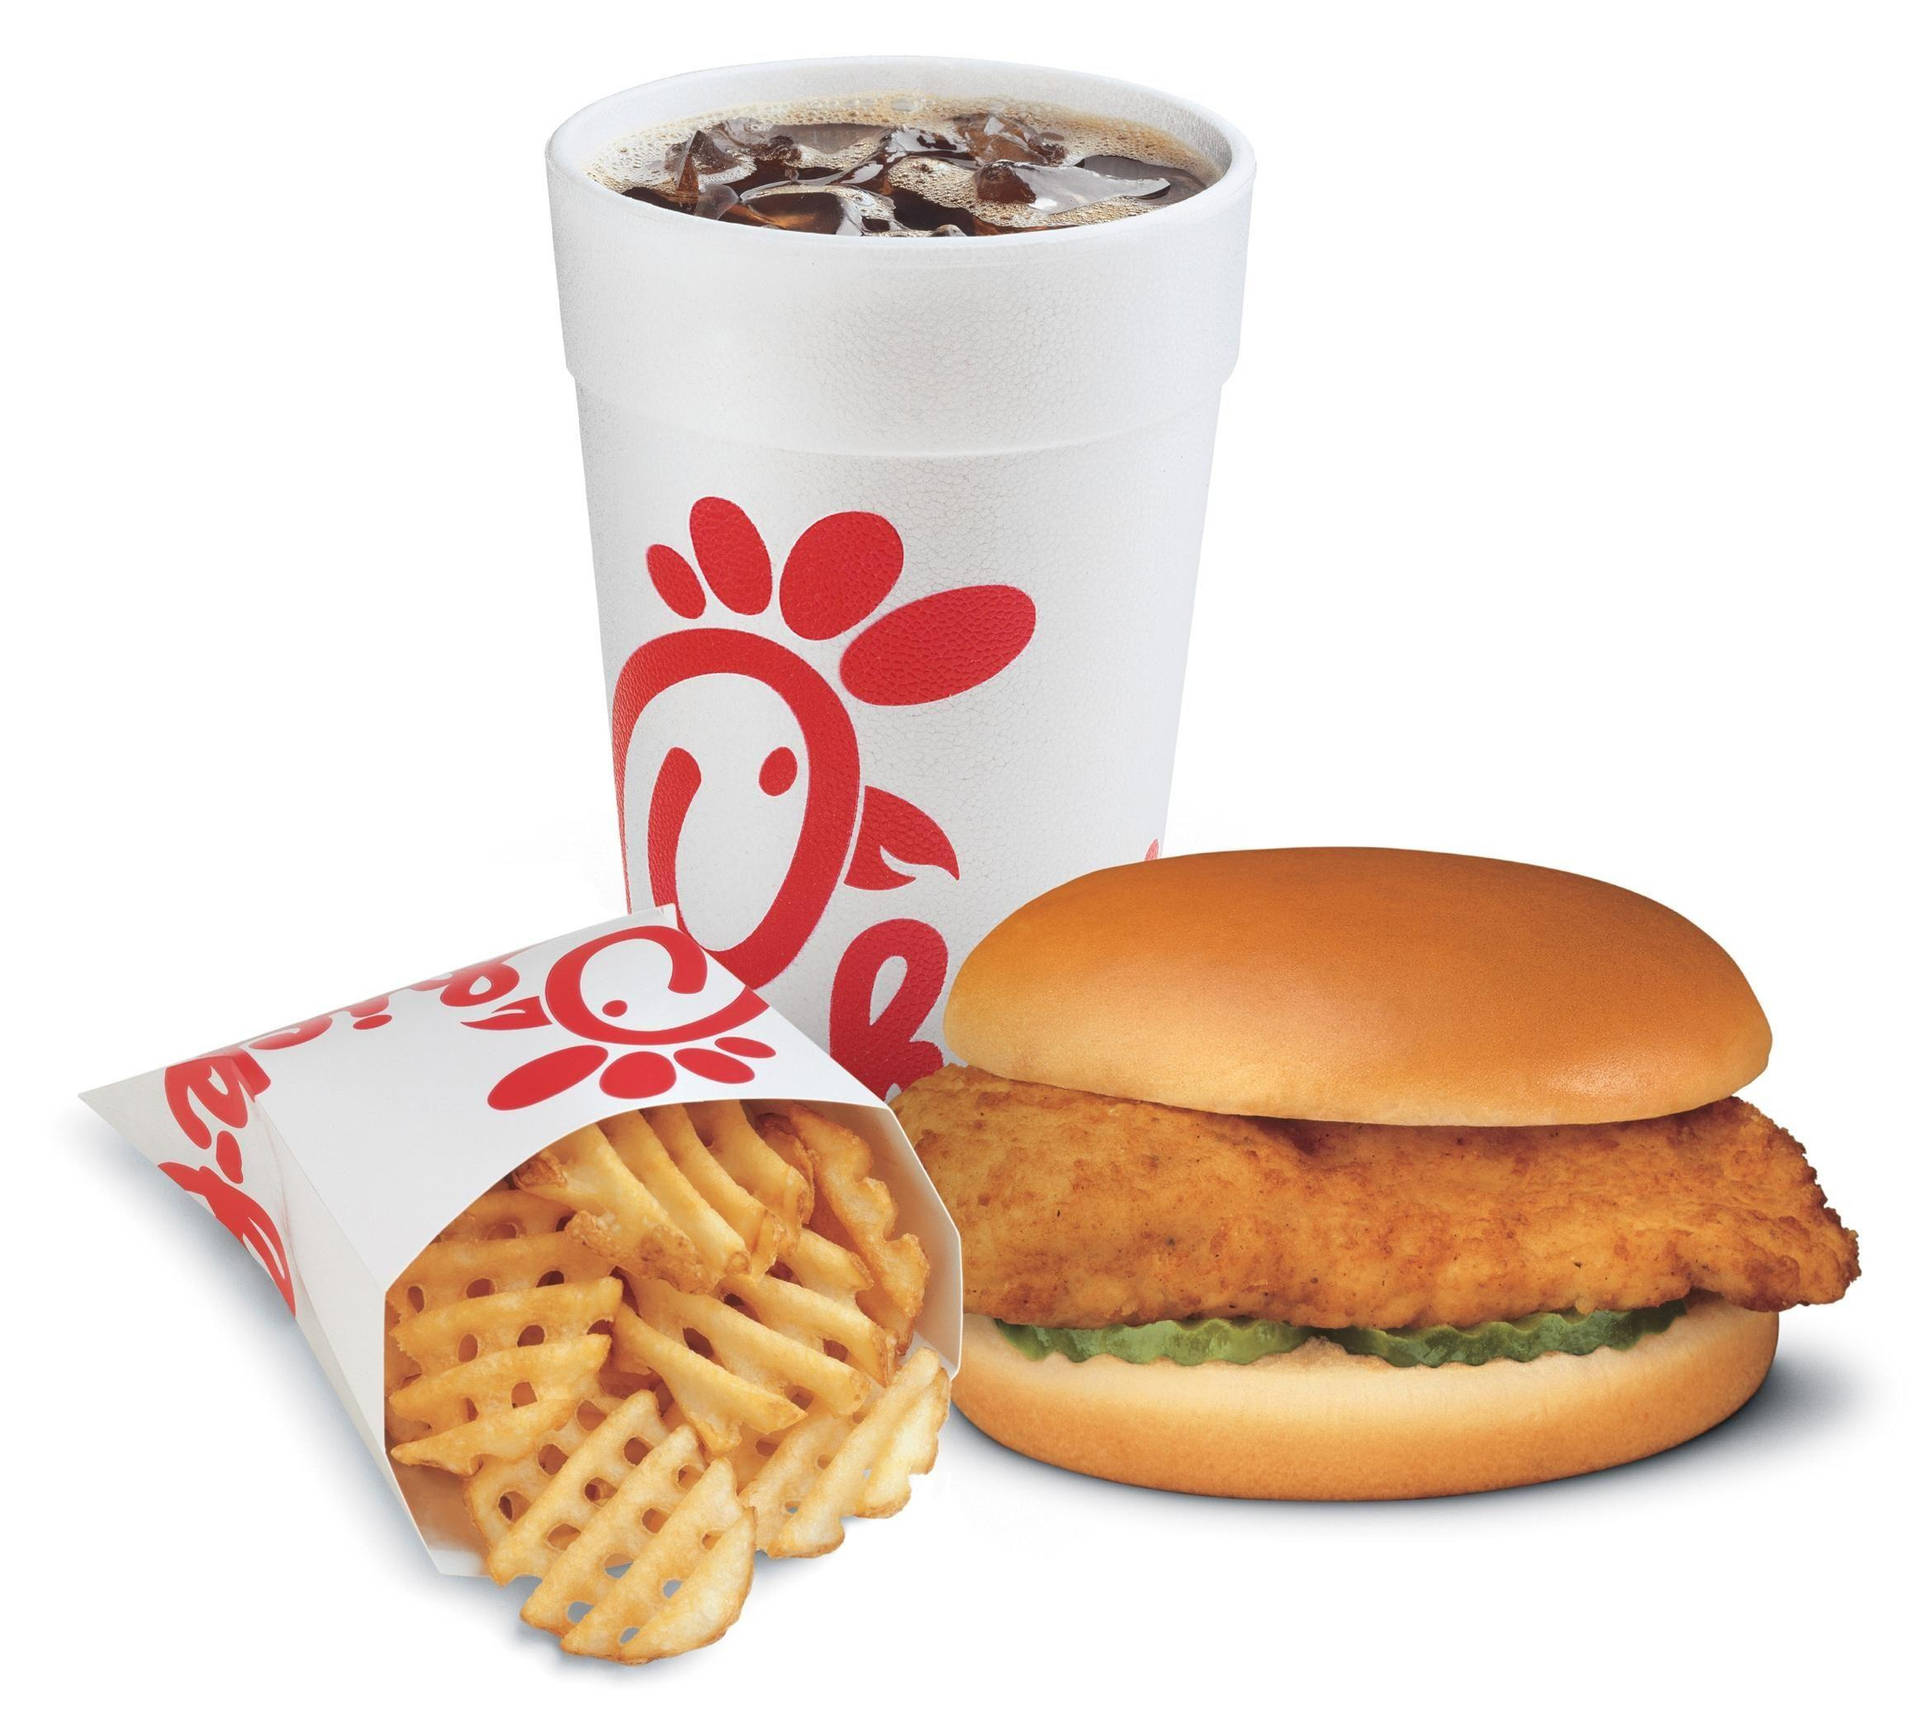 Chick Fil A Best Meal Background